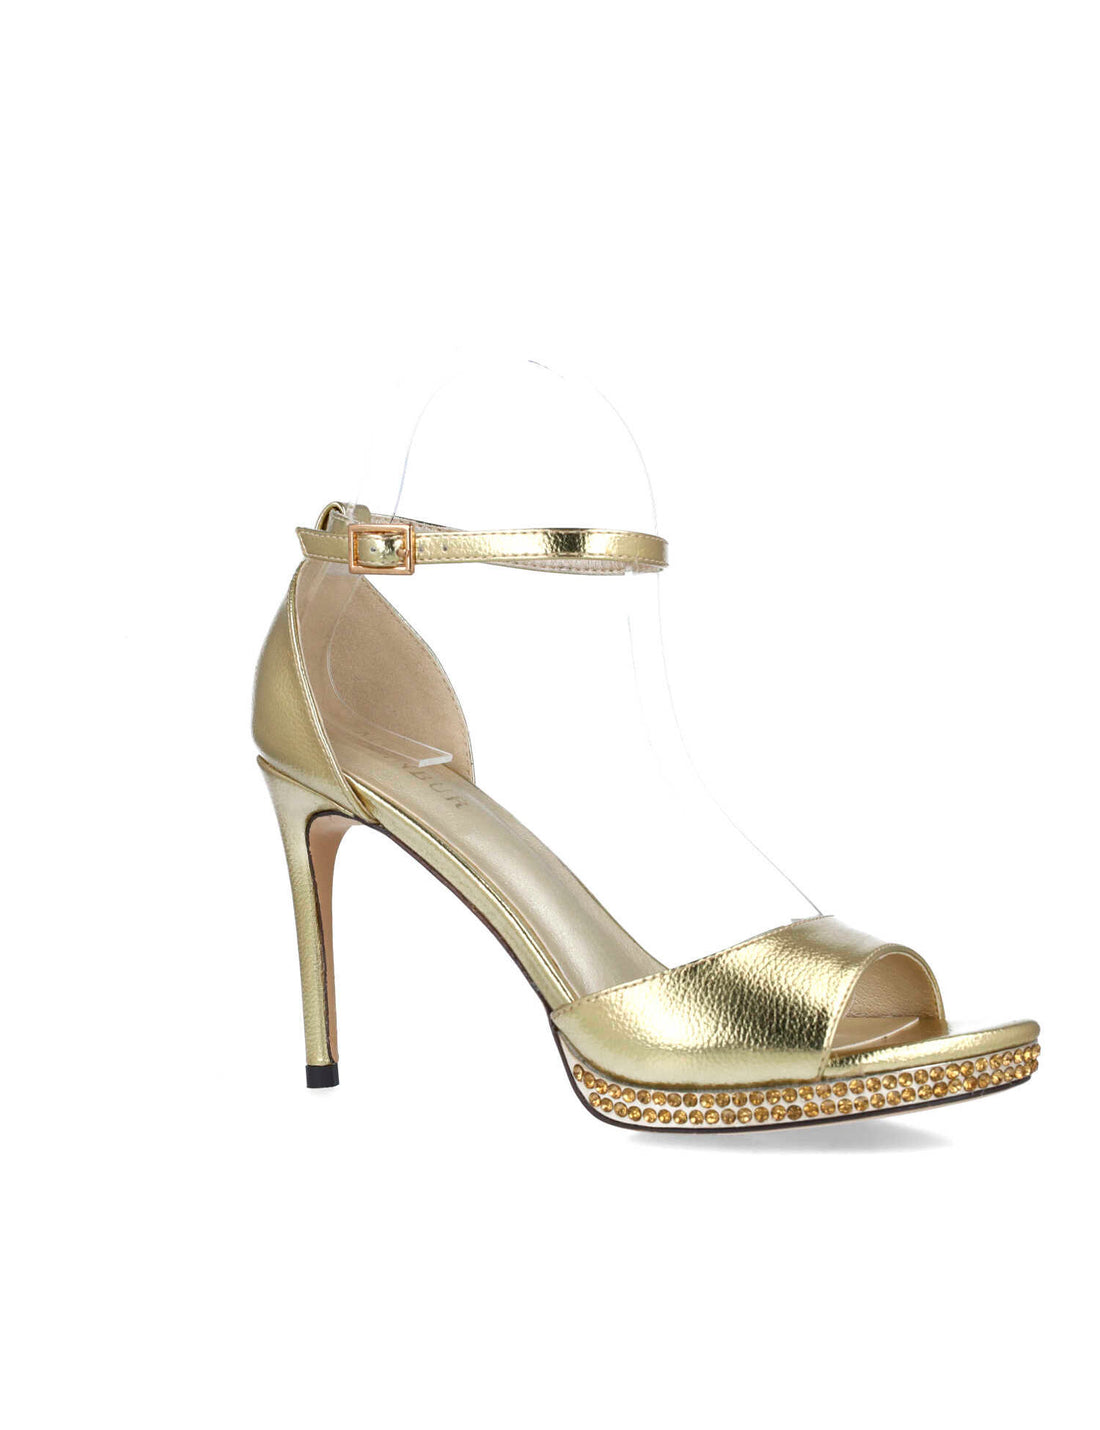 Shiny Gold High-Heel Sandals With Ankle Strap_25157_00_02